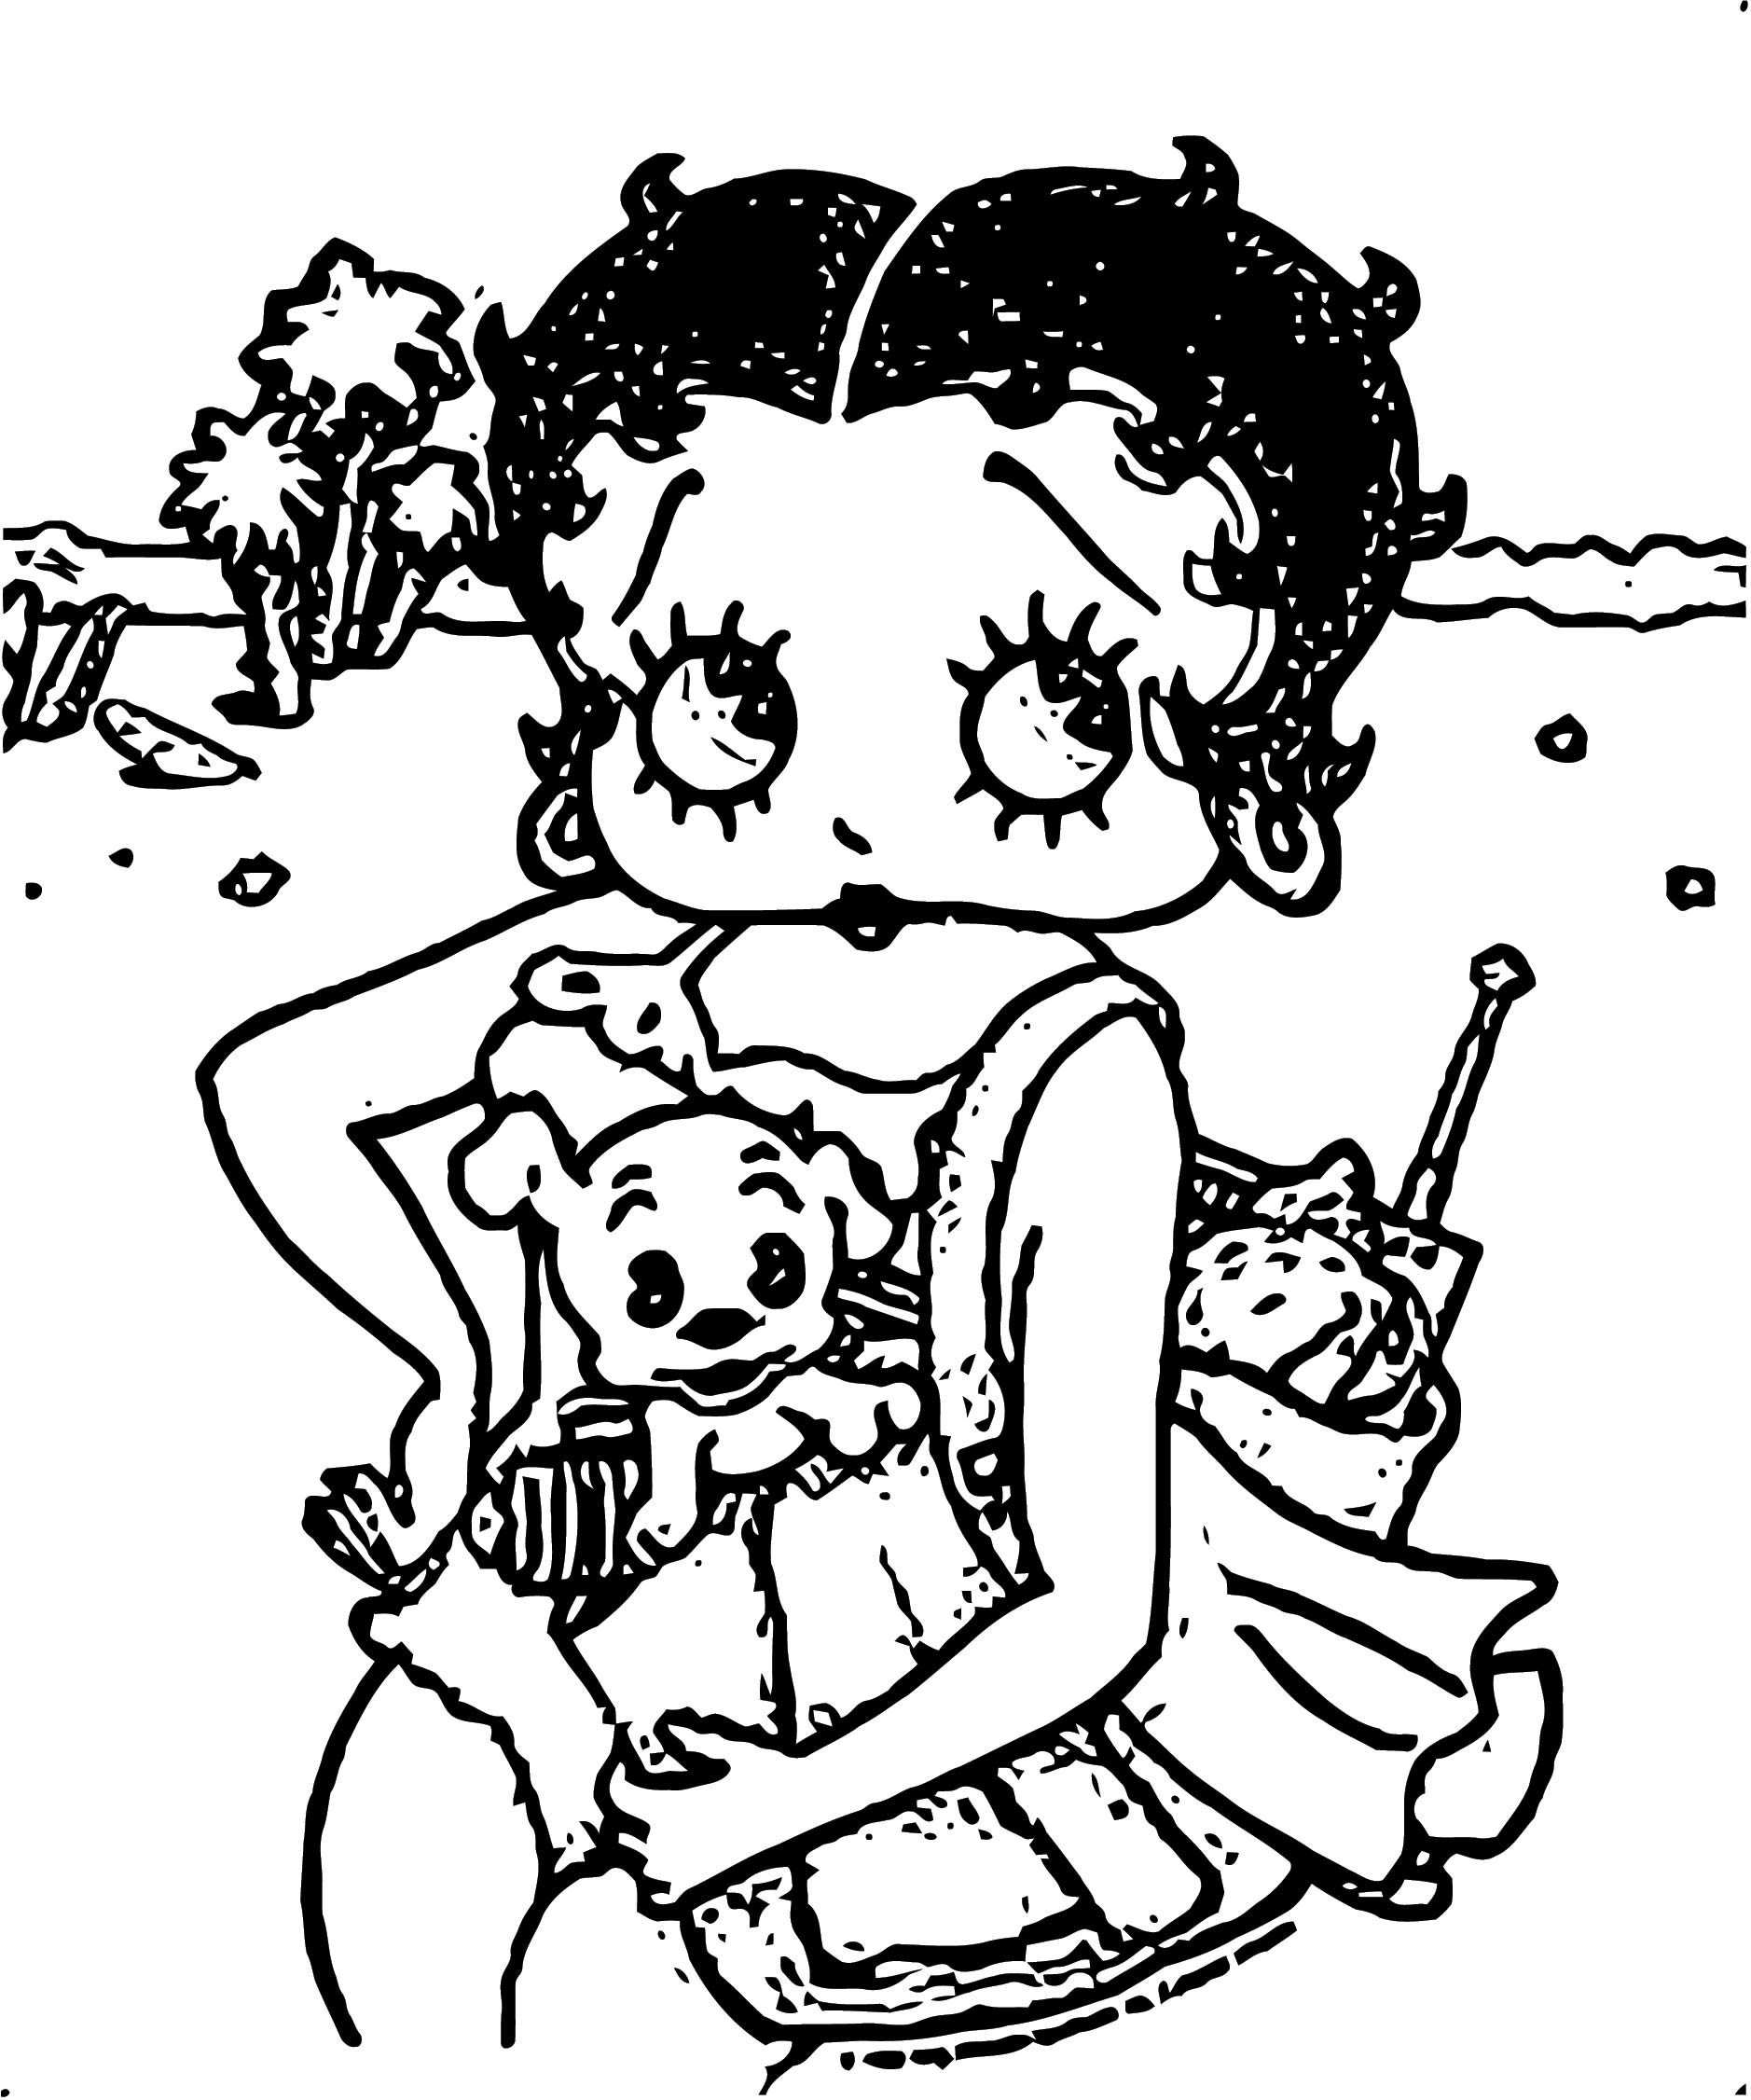 was betty boop in color